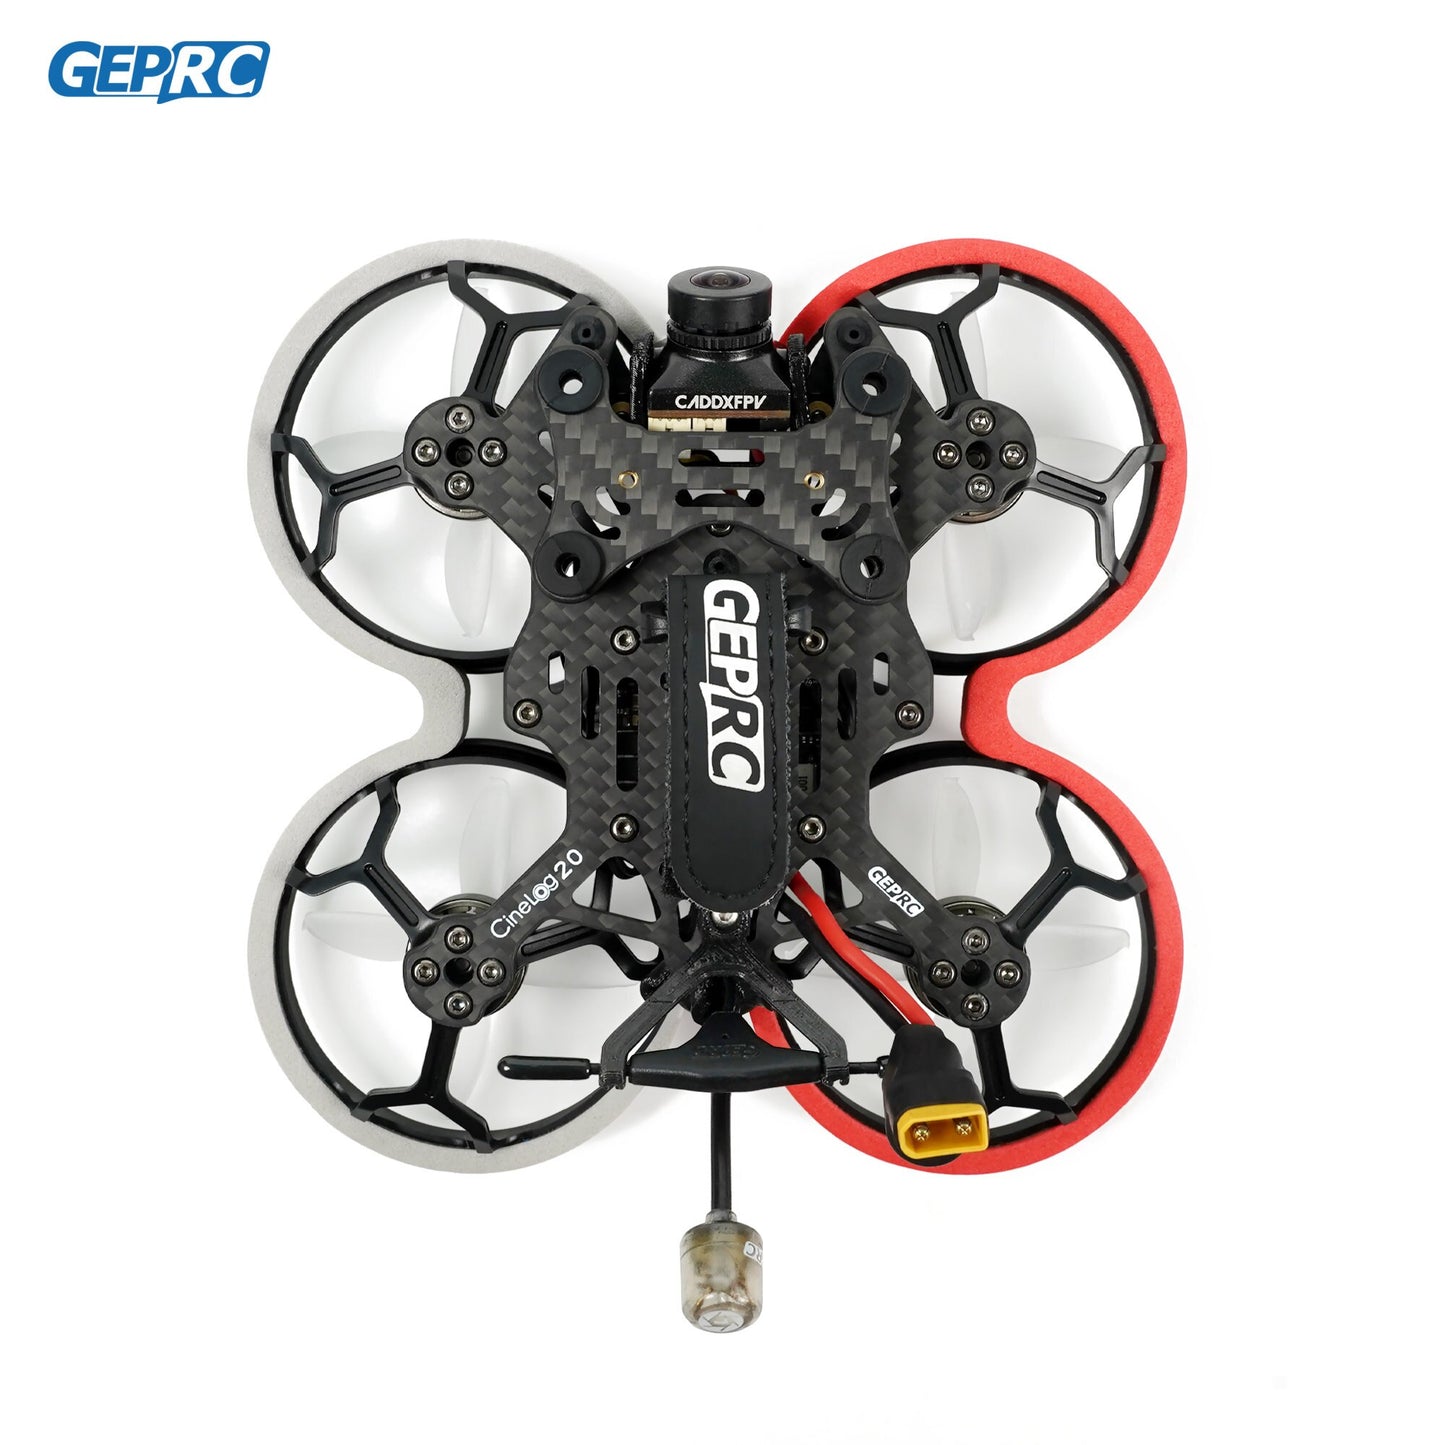 GEPRC Cinelog20 Analog FPV Drone - 2inch GEP-F411-35A AIO Caddx Ratel2 Cinewhoop 5500KV RC FPV Quadcopter Racing Freestyle Drone